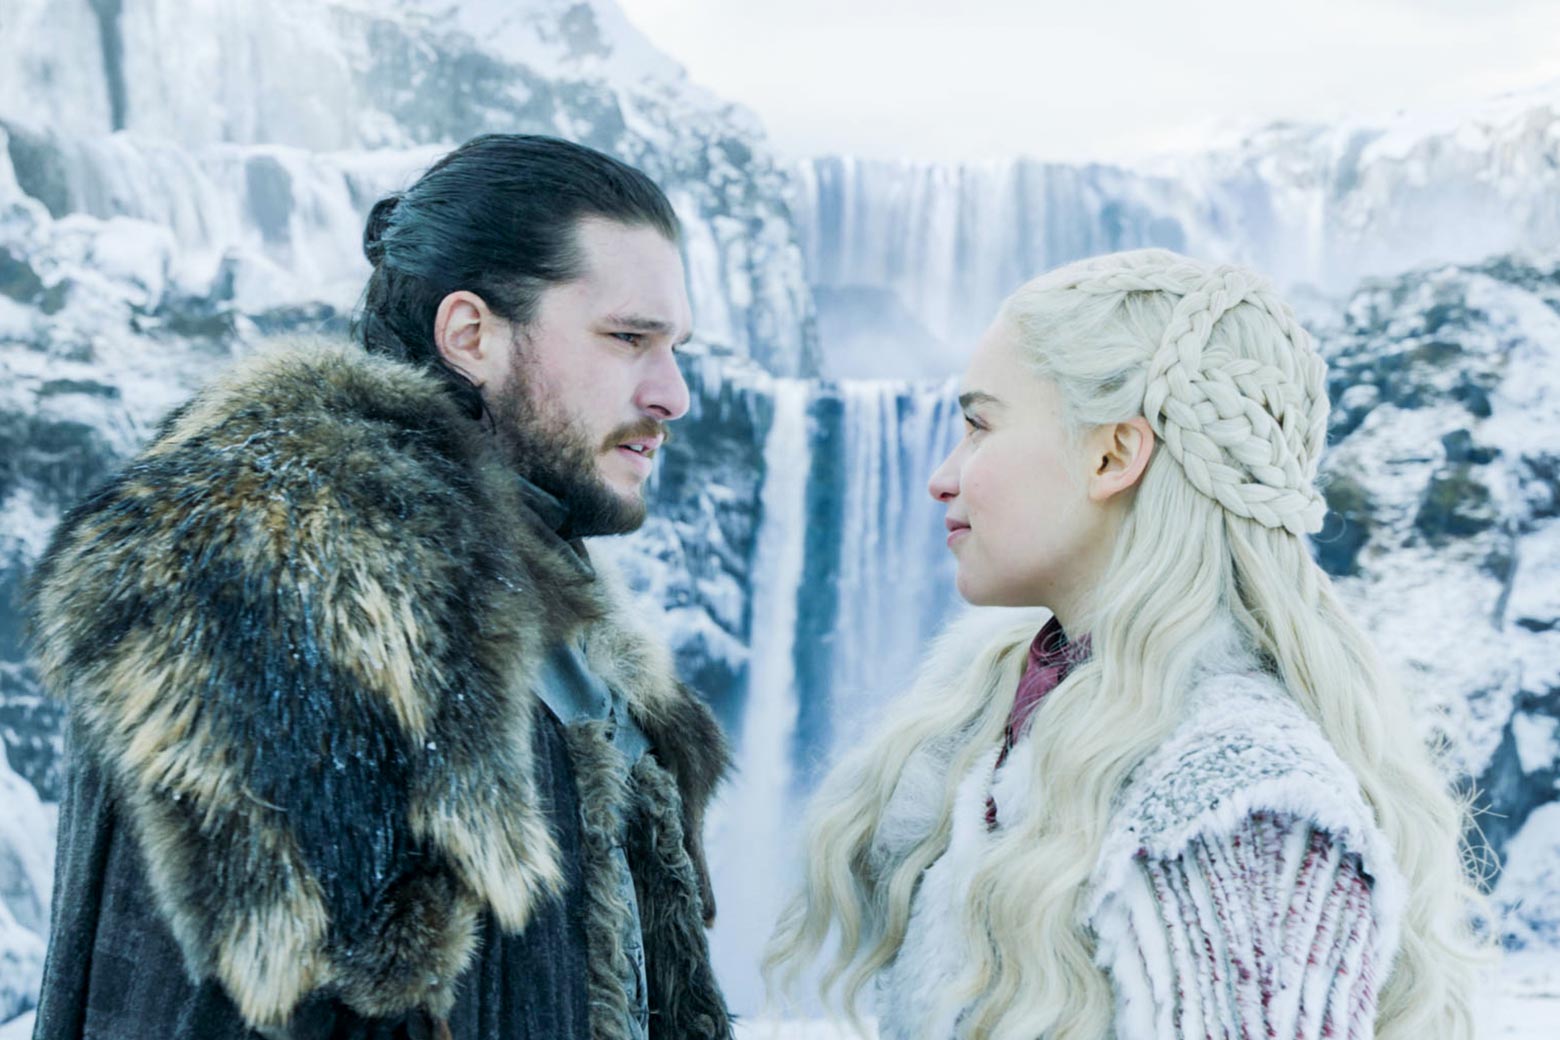 Forced Aunty Xxx Mom - Game of Thrones: How bad is it to marry your aunt, as Jon Snow might do?